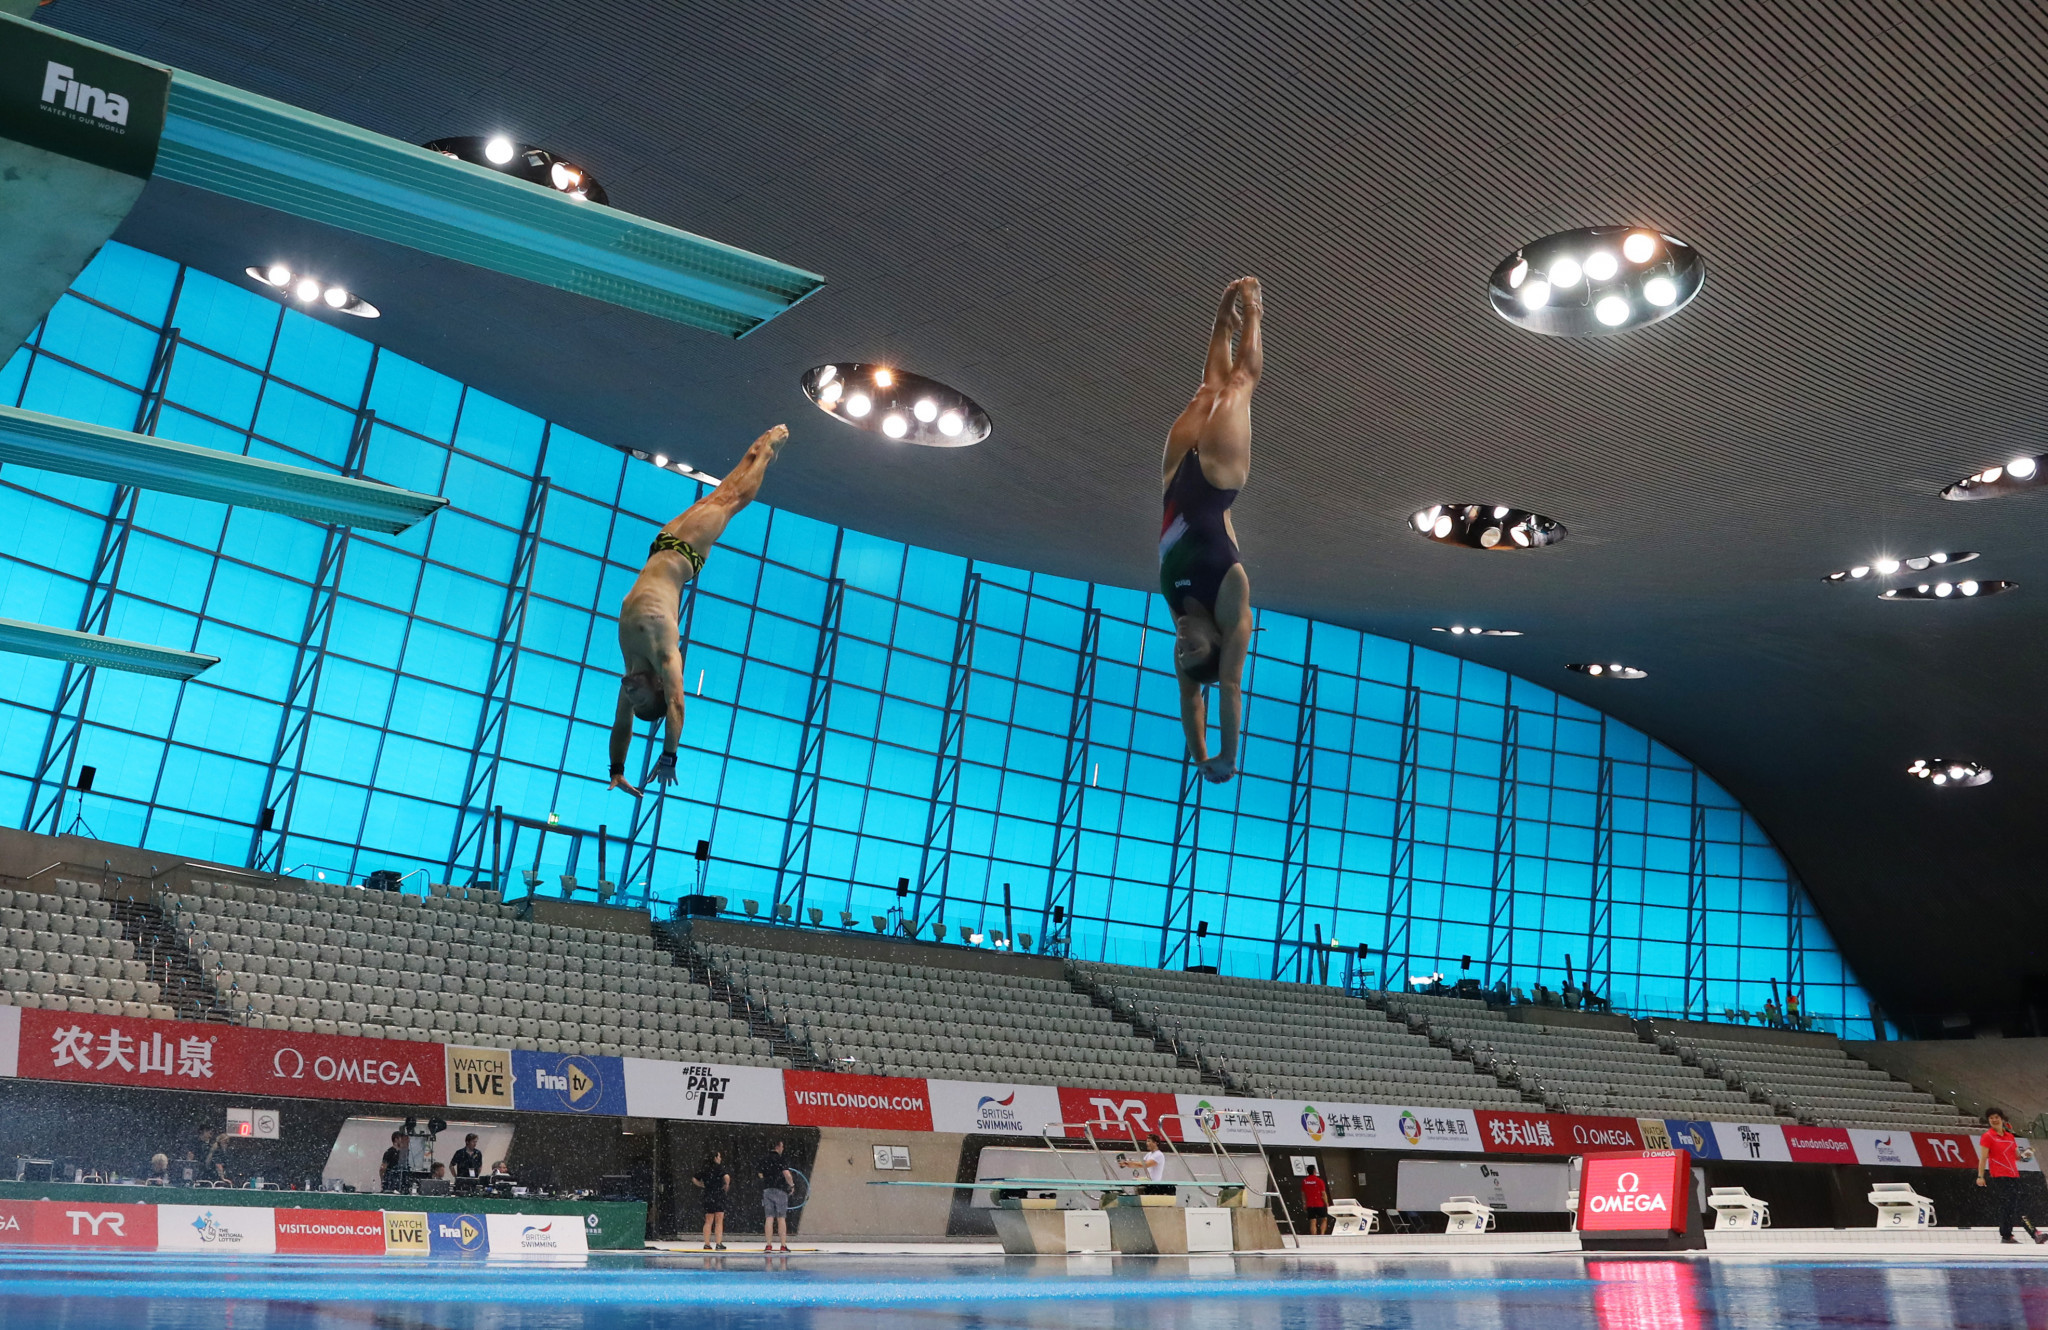 London Aquatics Centre staged the three-day International Swimming Federation's Diving World Series in May ©Getty Images